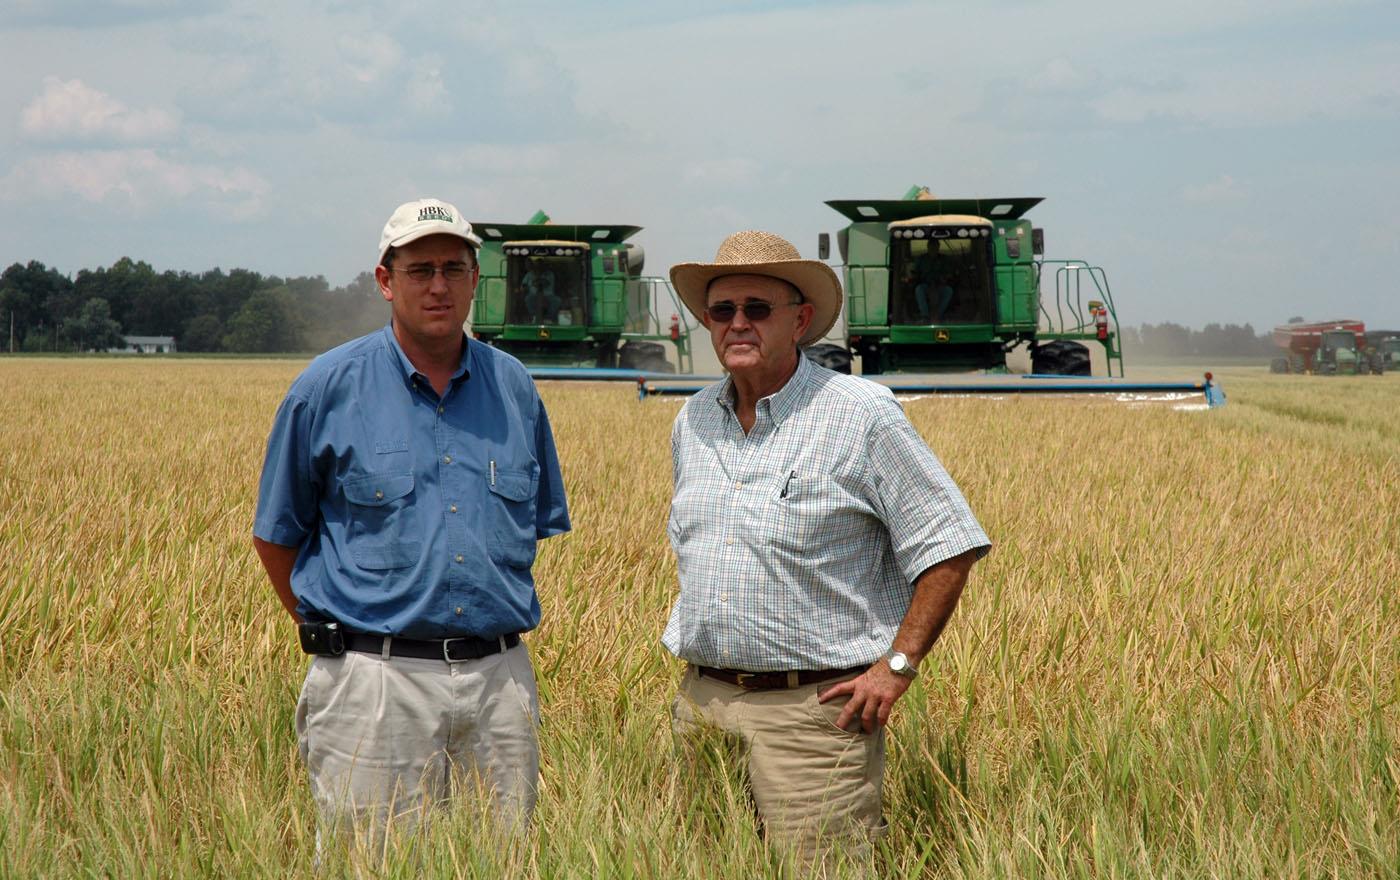 Two white men standing in mature rice field, two green combines in background